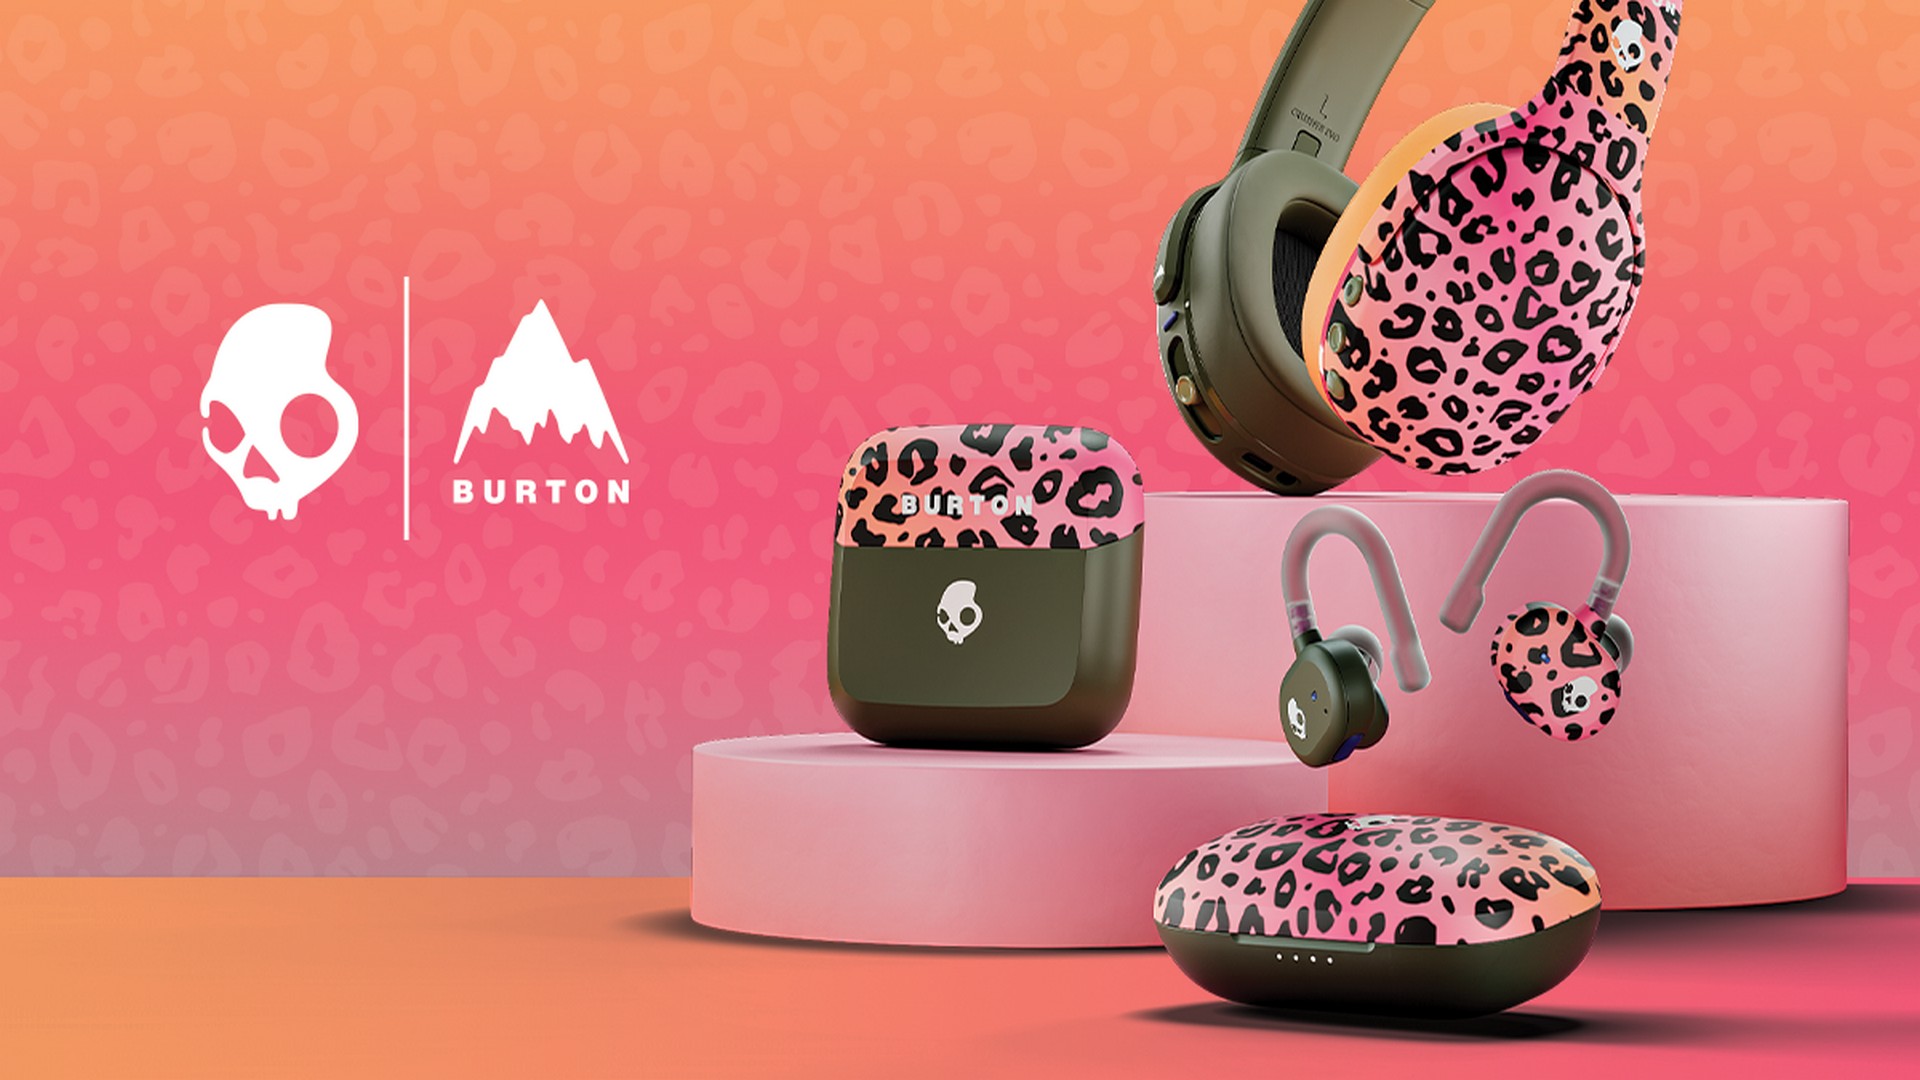 Skullcandy And Burton Unleash The Wild Side With Limited-Edition Collaboration